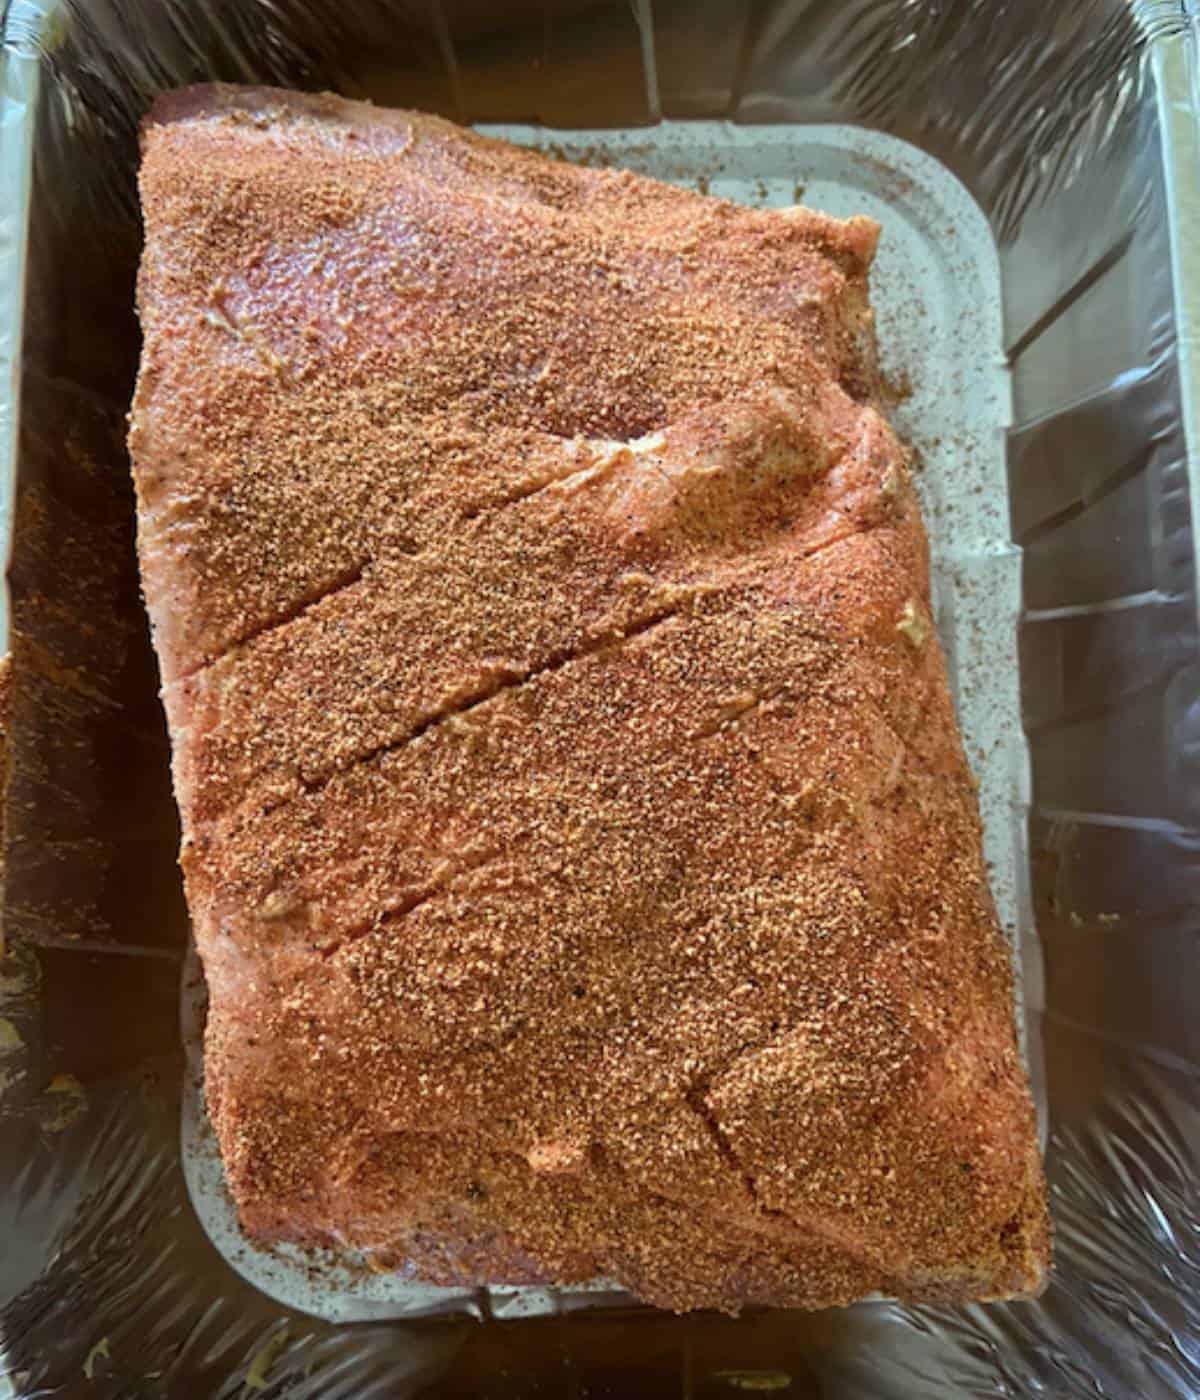 Pork butt coated in dijon mustard then covered with seasoning.